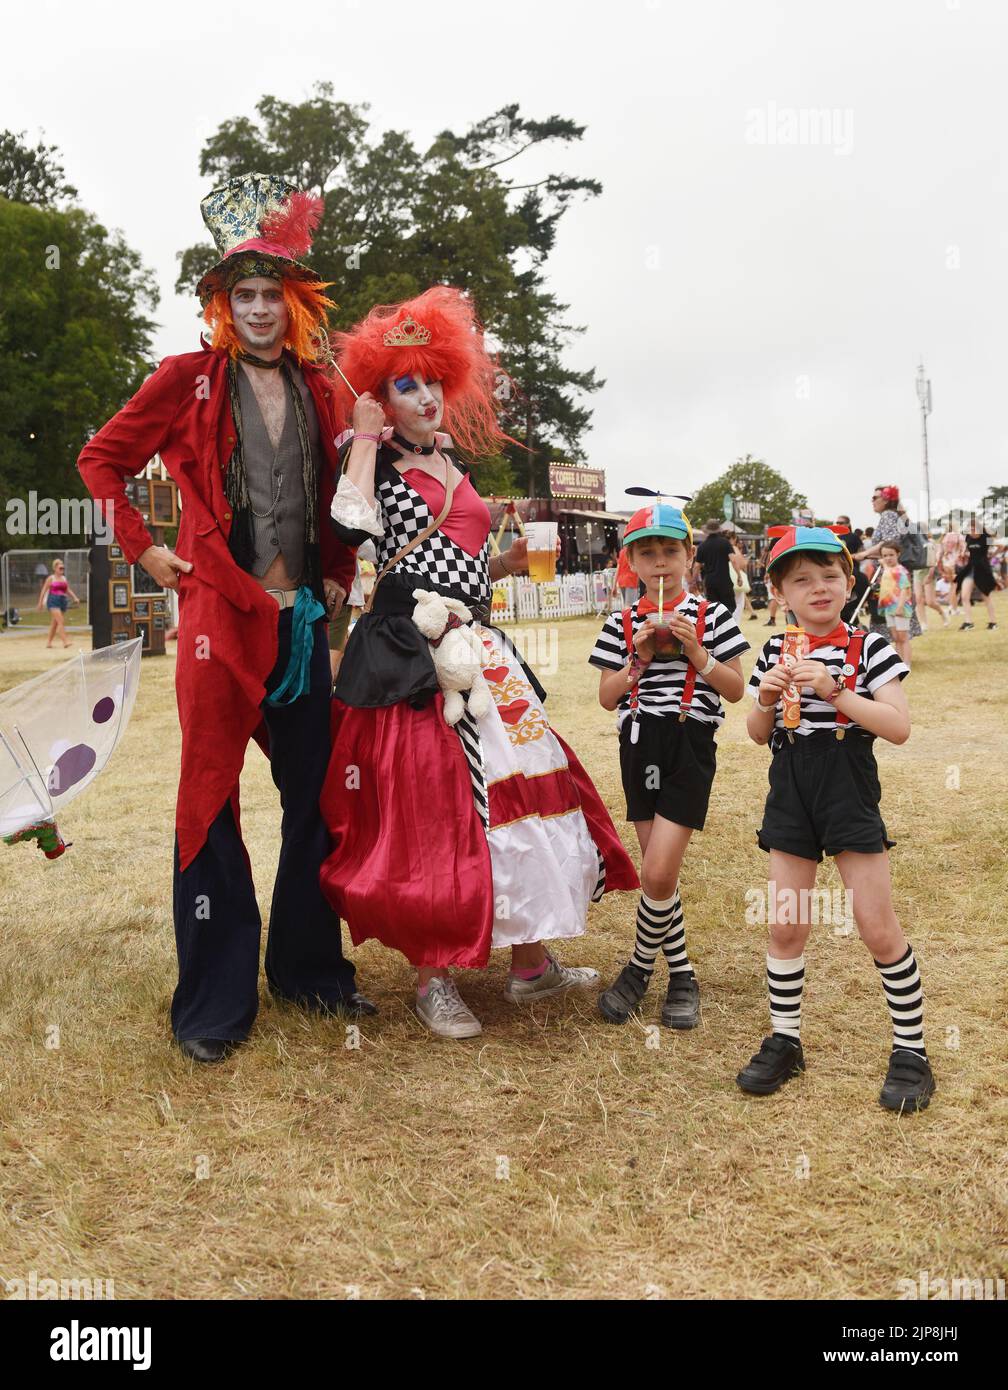 A family kitted out in Alice in Wonderland inspired outfits.  Scenes at the family friendly festival Camp Bestival, Lulworth Castle and Estate, Dorset UK July 28 - 31 2022 Stock Photo